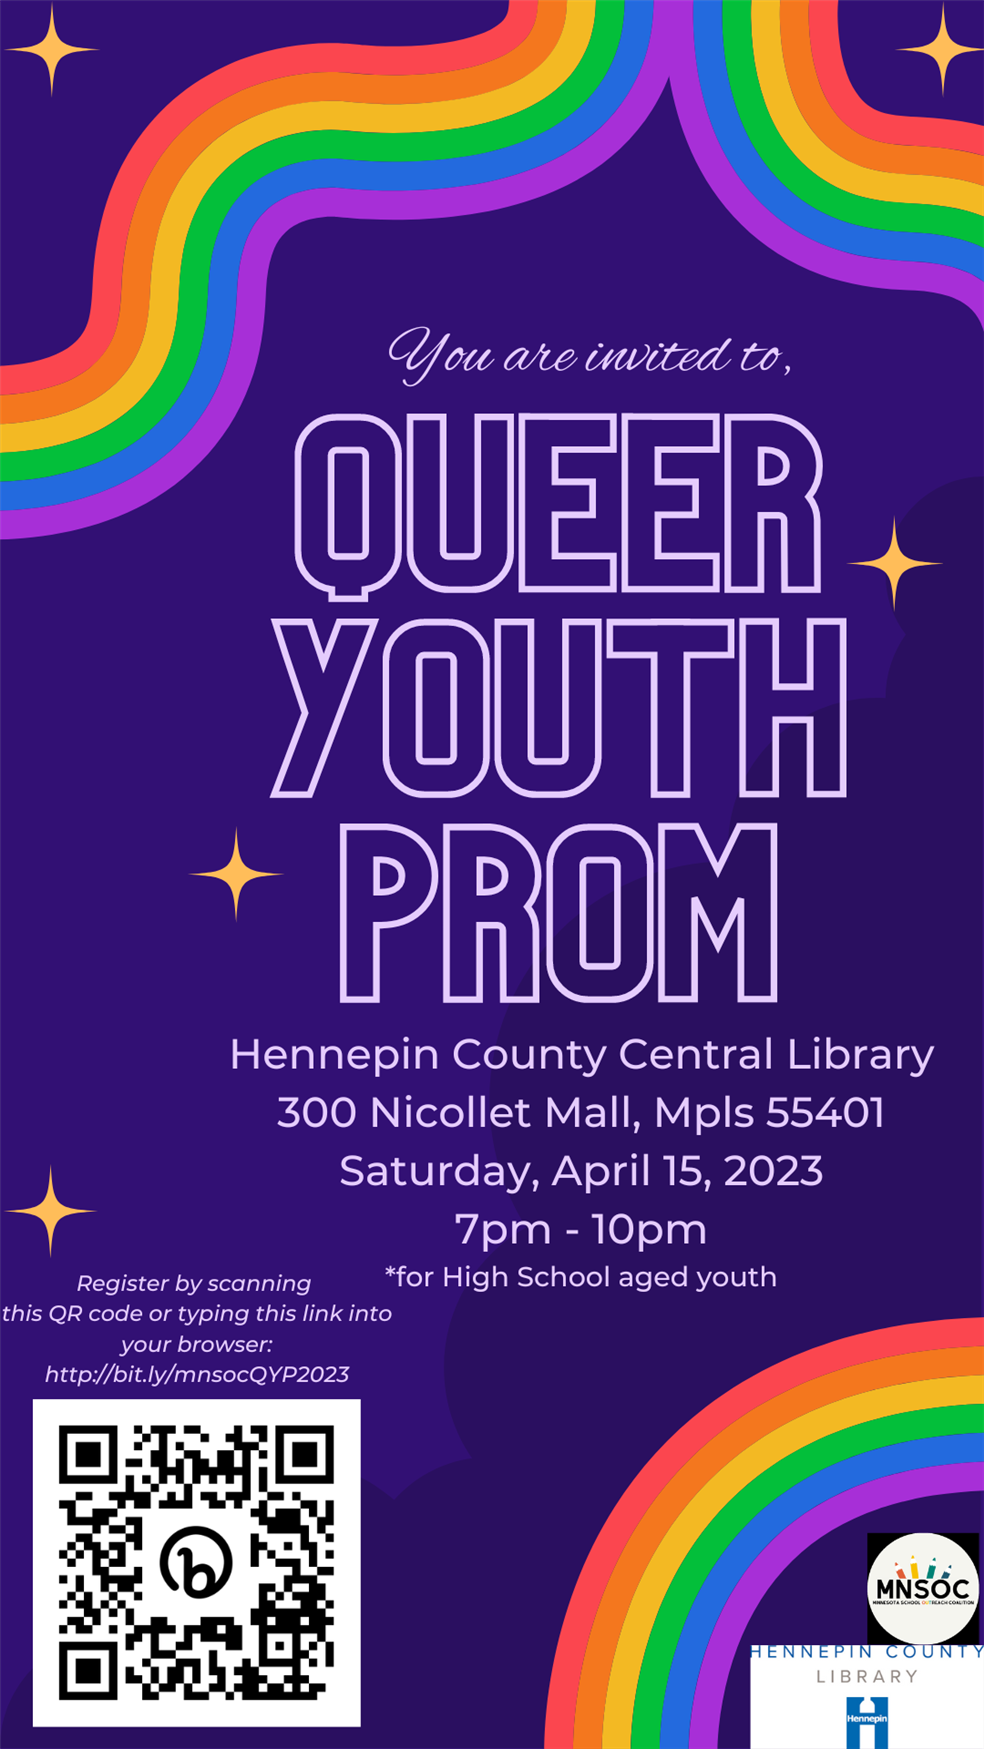 Queer Youth Prom flyer 2023